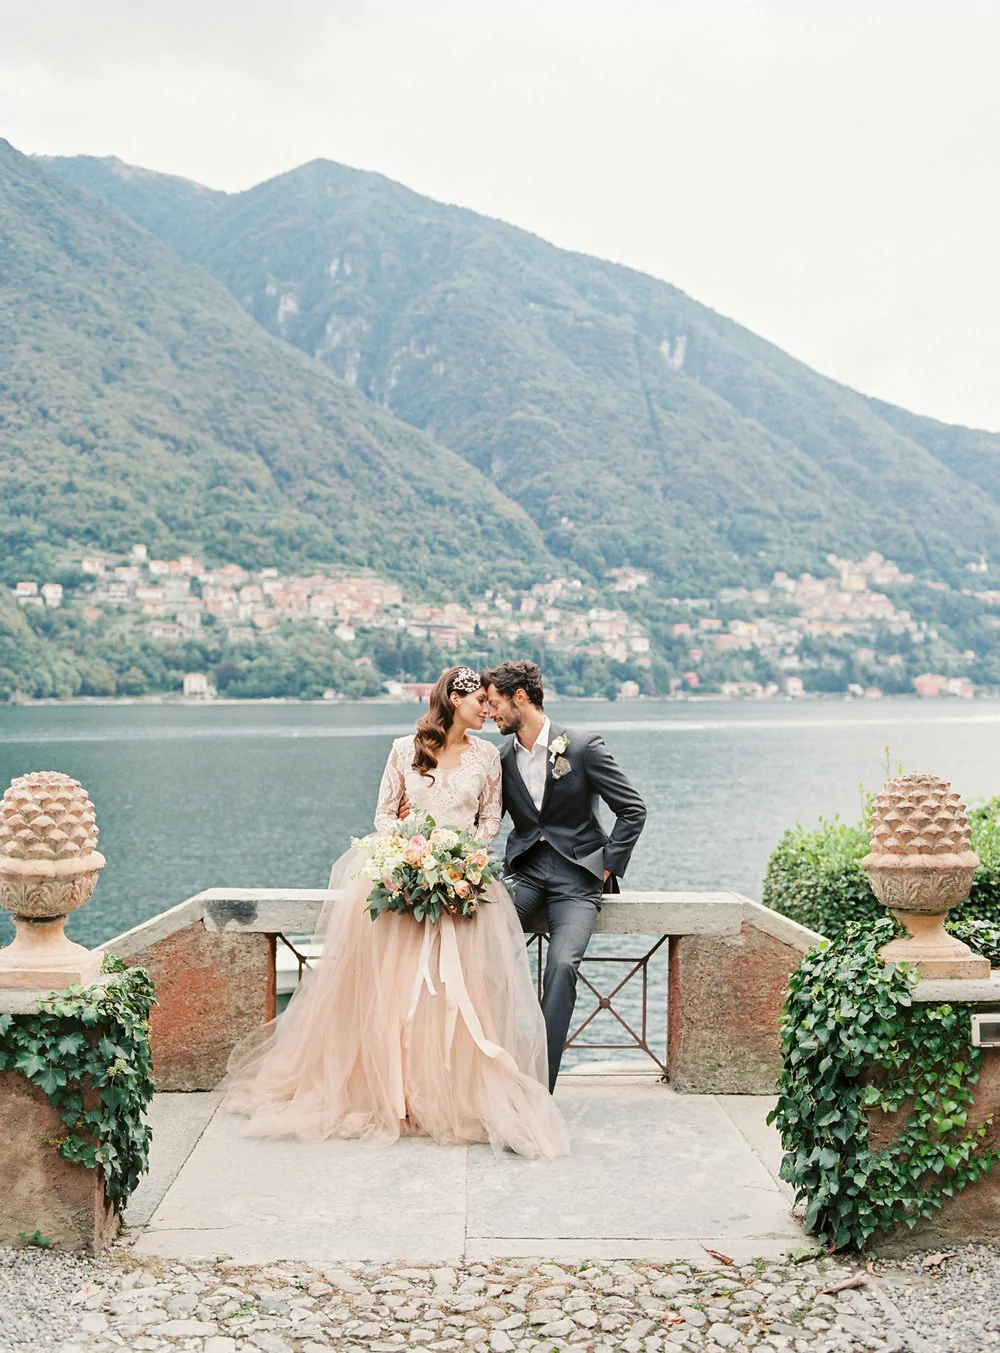 10 Most Beautiful Places in the World for Your Wedding